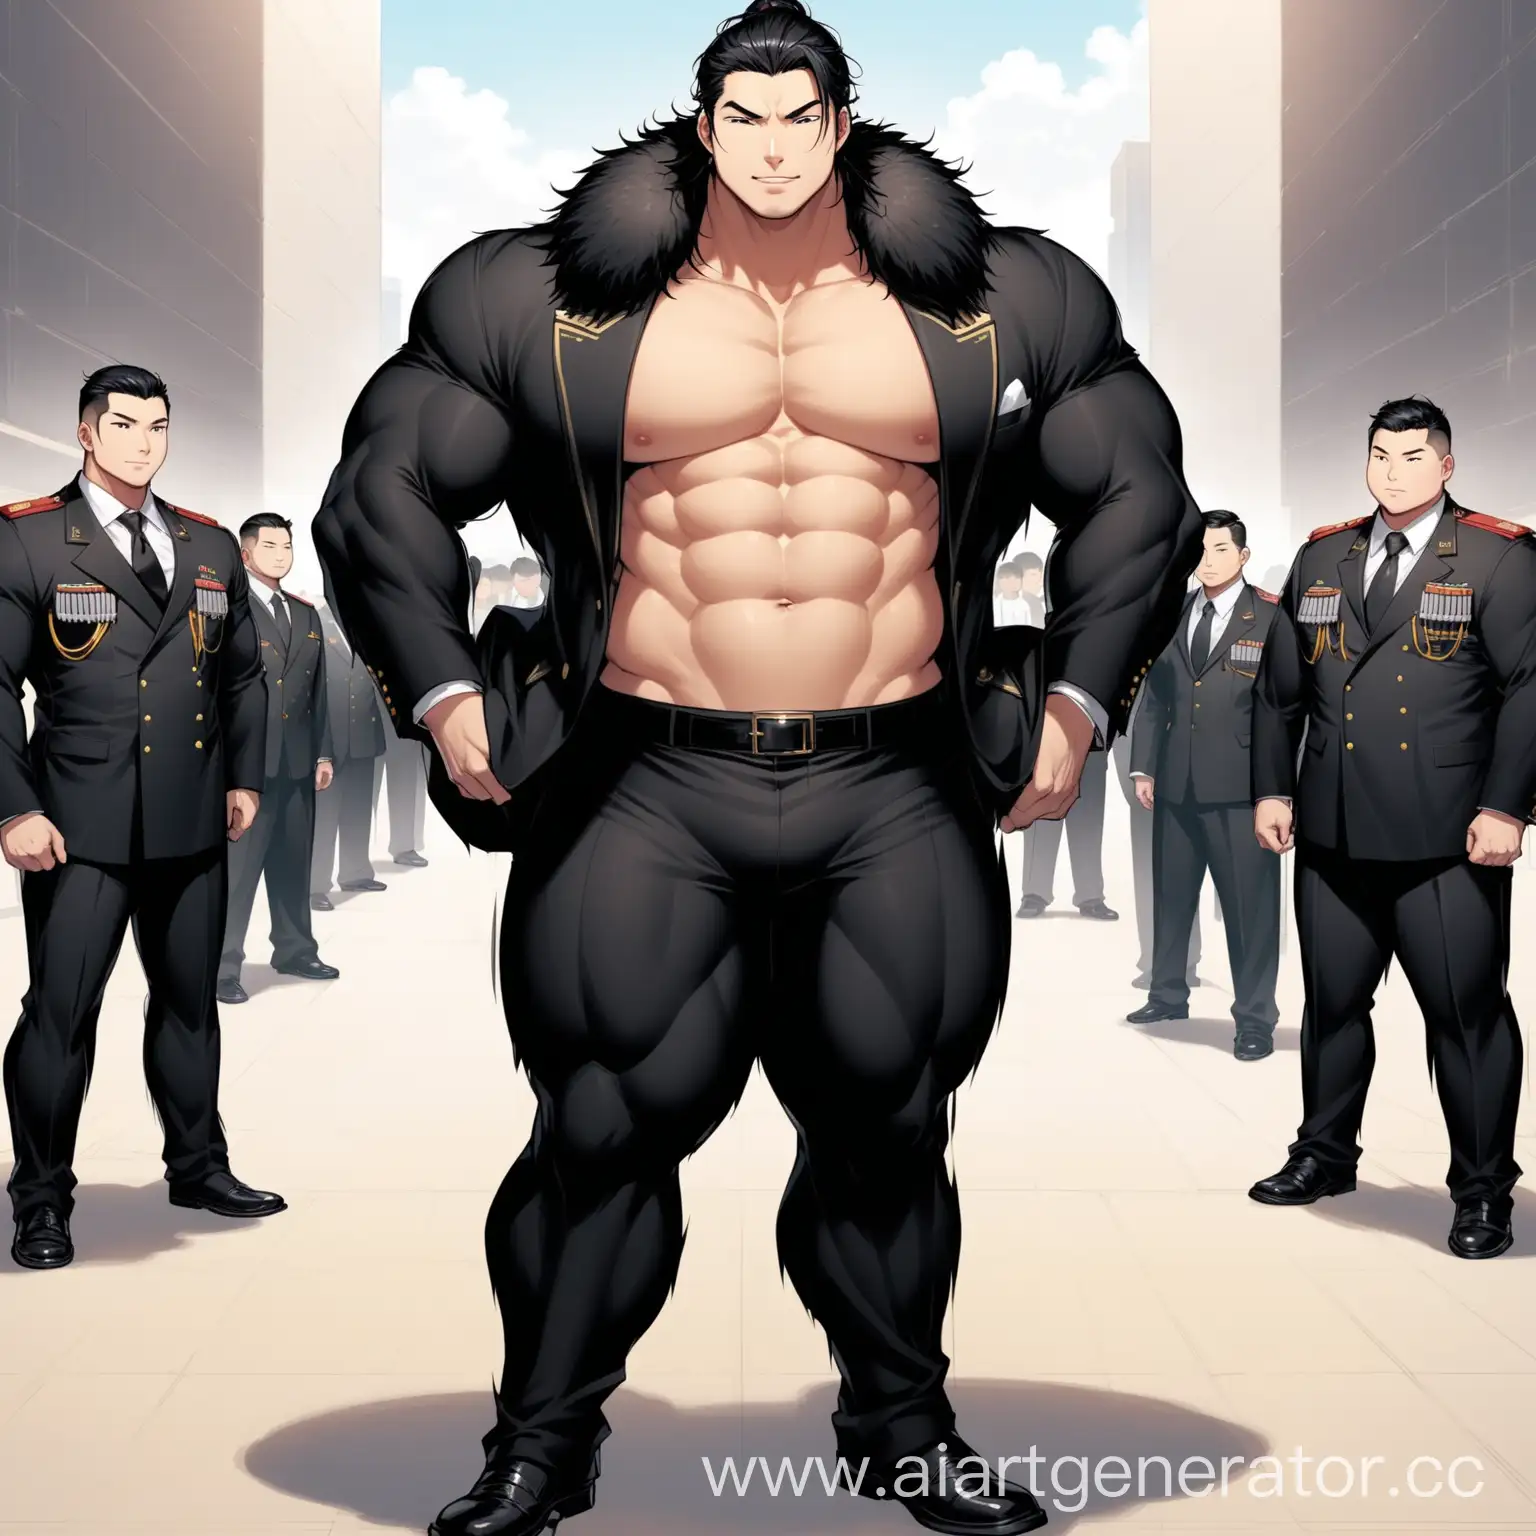 Giant-Chinese-Man-in-Sleek-Black-Suit-with-Visible-Abs-and-Military-Accents